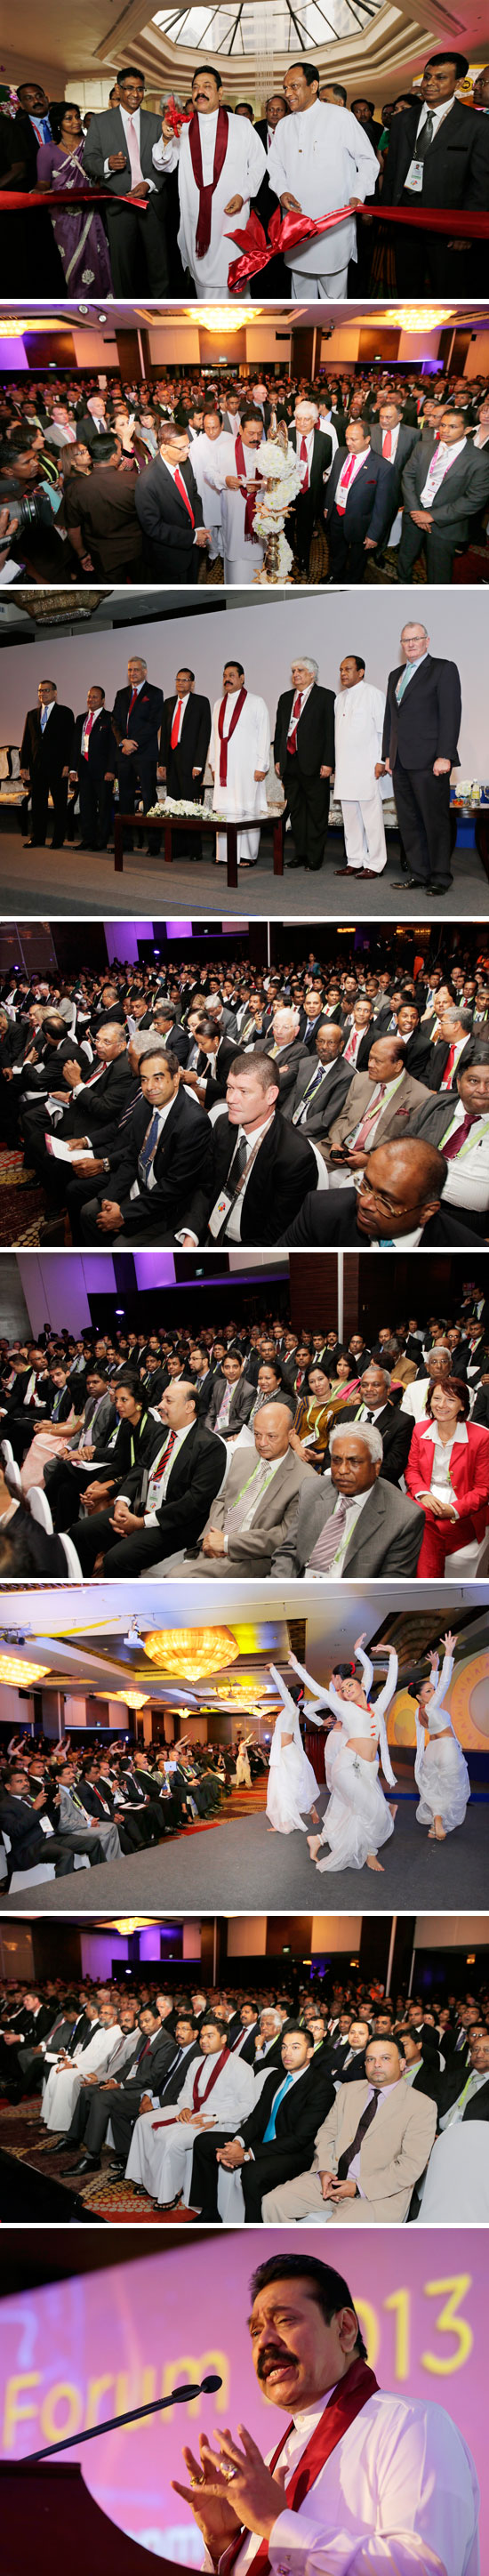 VIDEO: Commonwealth Business Forum 2013...